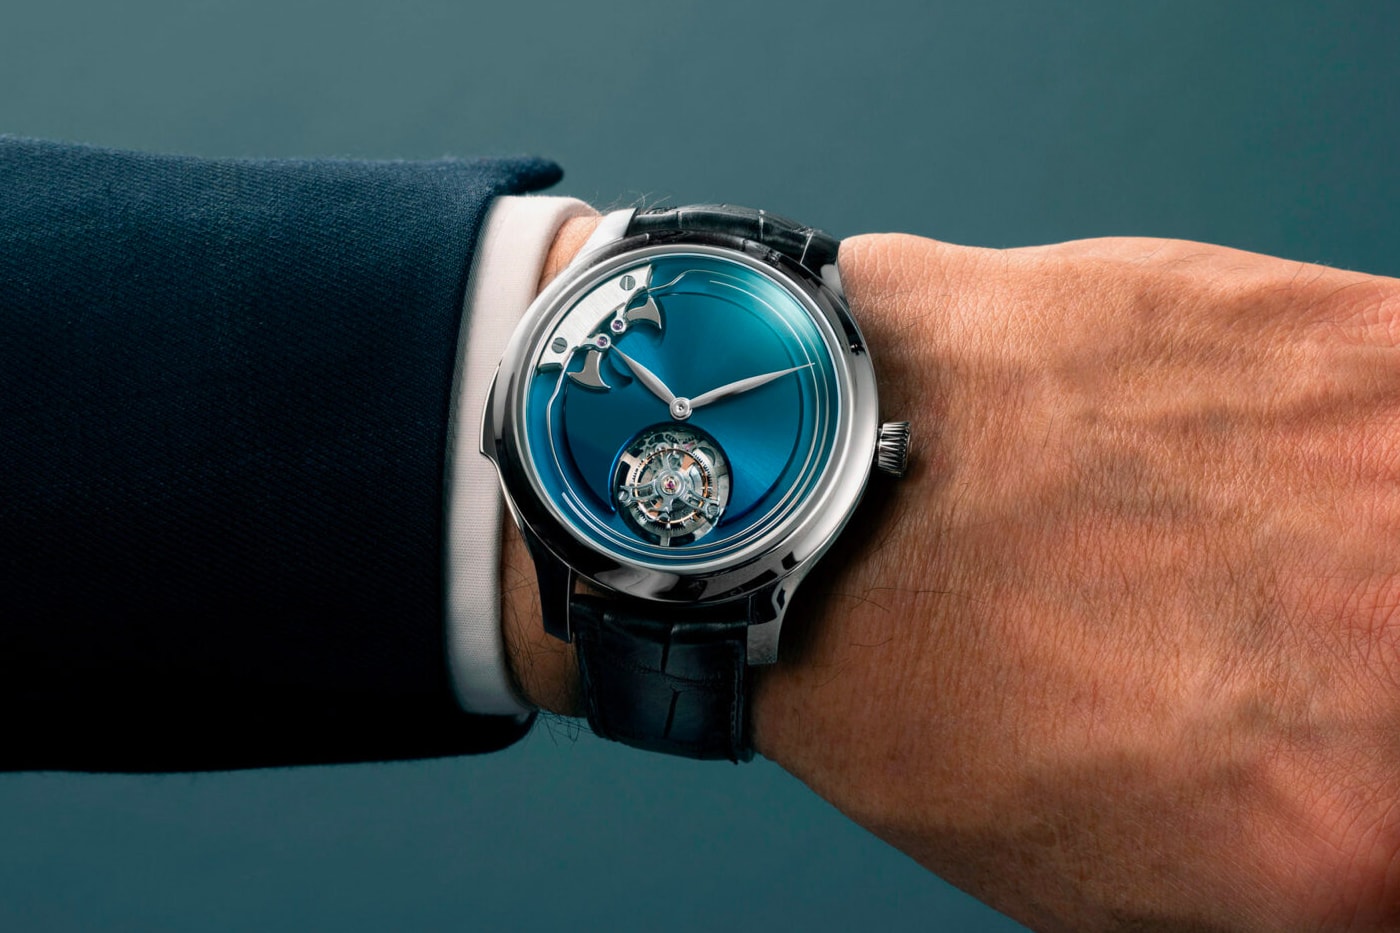 The Endeavour Concept Minute Repeater Tourbillon  H. Moser & Cie watches in-house movement swiss german mechanical watches 